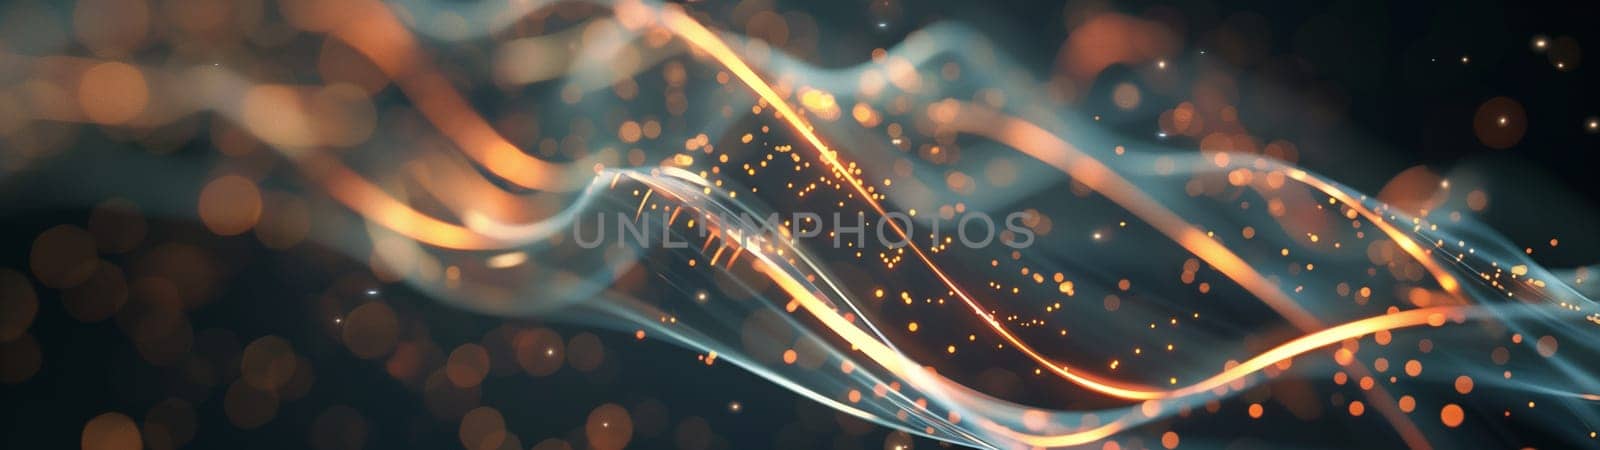 Colorful abstract 3d background with microparticles and waves by NeuroSky